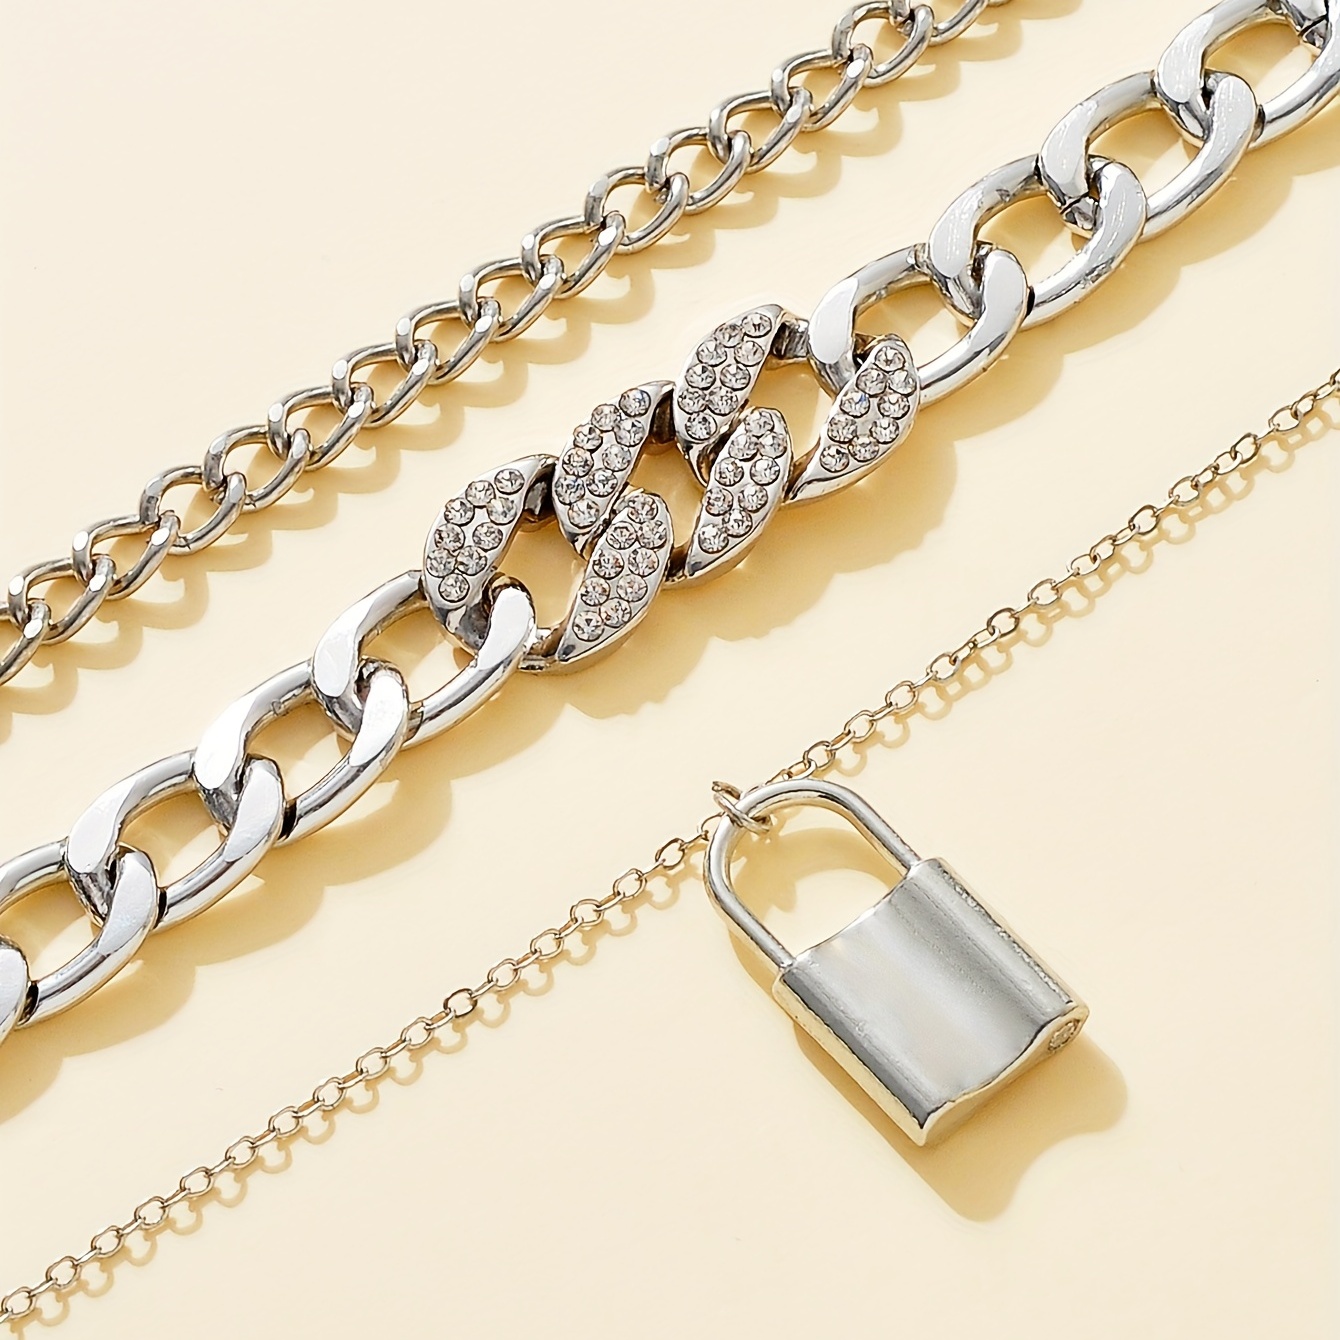 Chain Necklace Chunky Thin Padlock Necklace Chain for Men Curb 